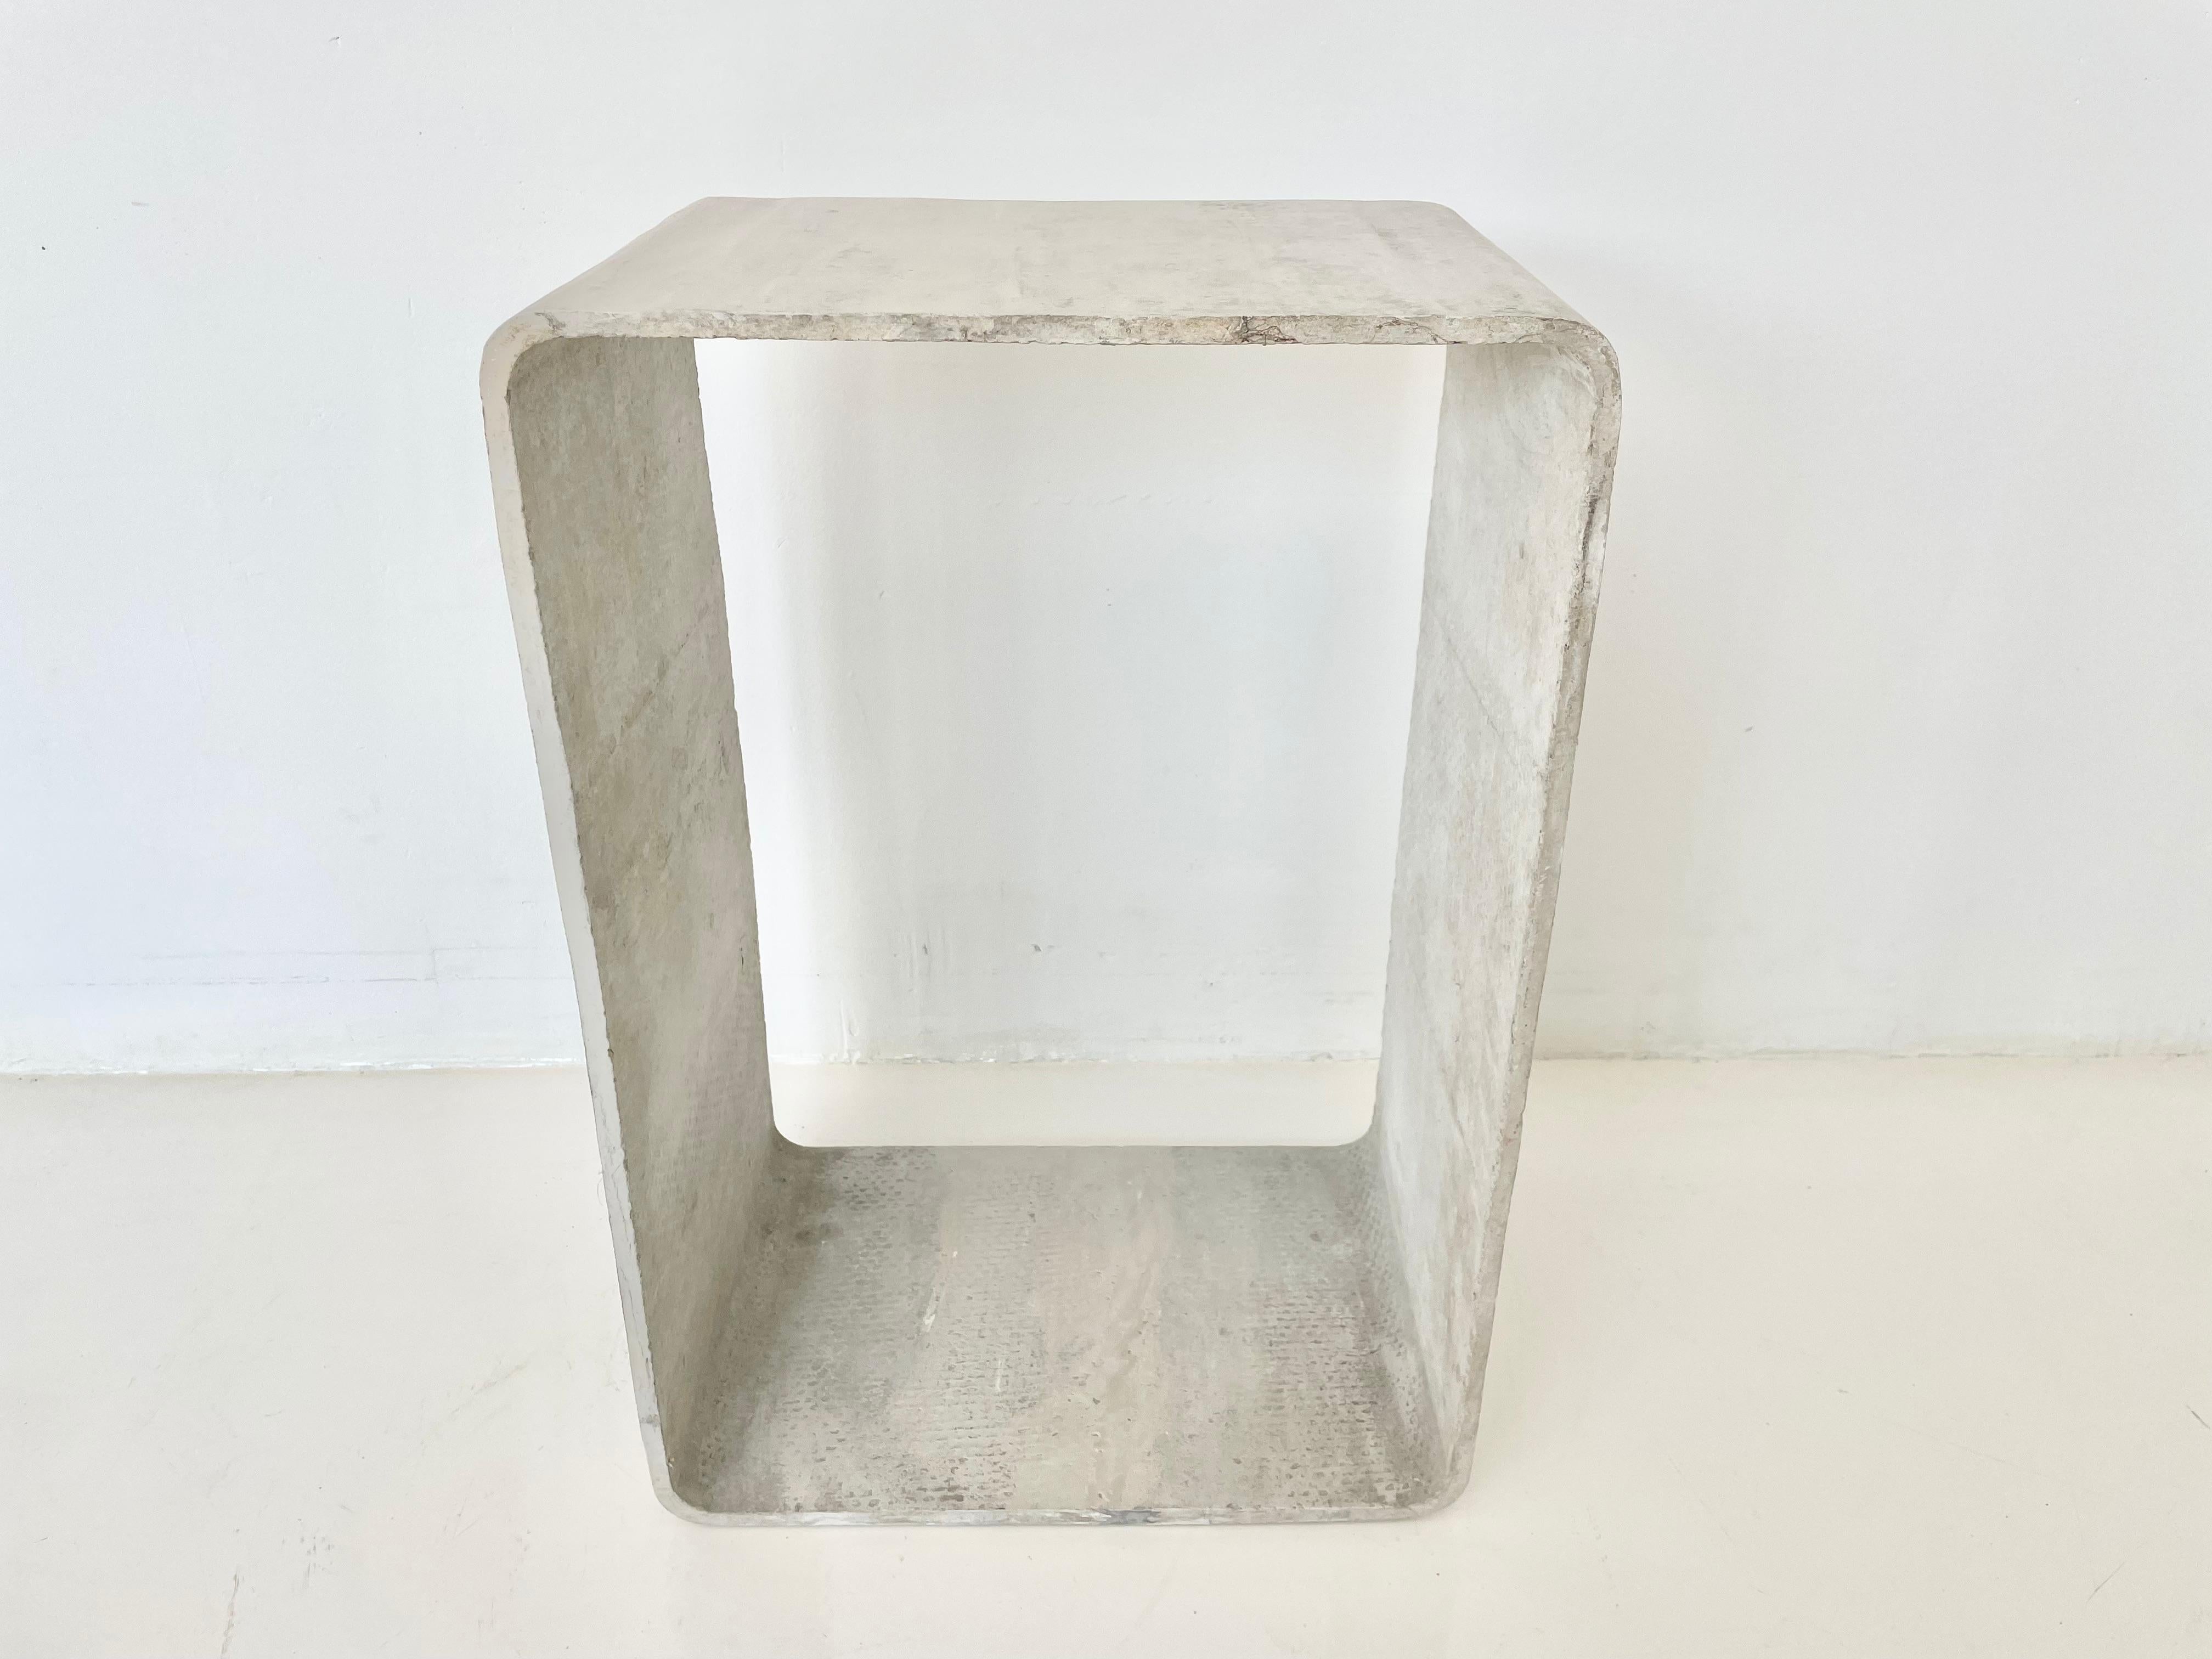 Fantastic modular fiber cement cube by Swiss Architect Willy Guhl, for Eternit. Great as a side table, for holding books or as a minimalist nightstand. Only one available. Can be set vertically or horizontally.